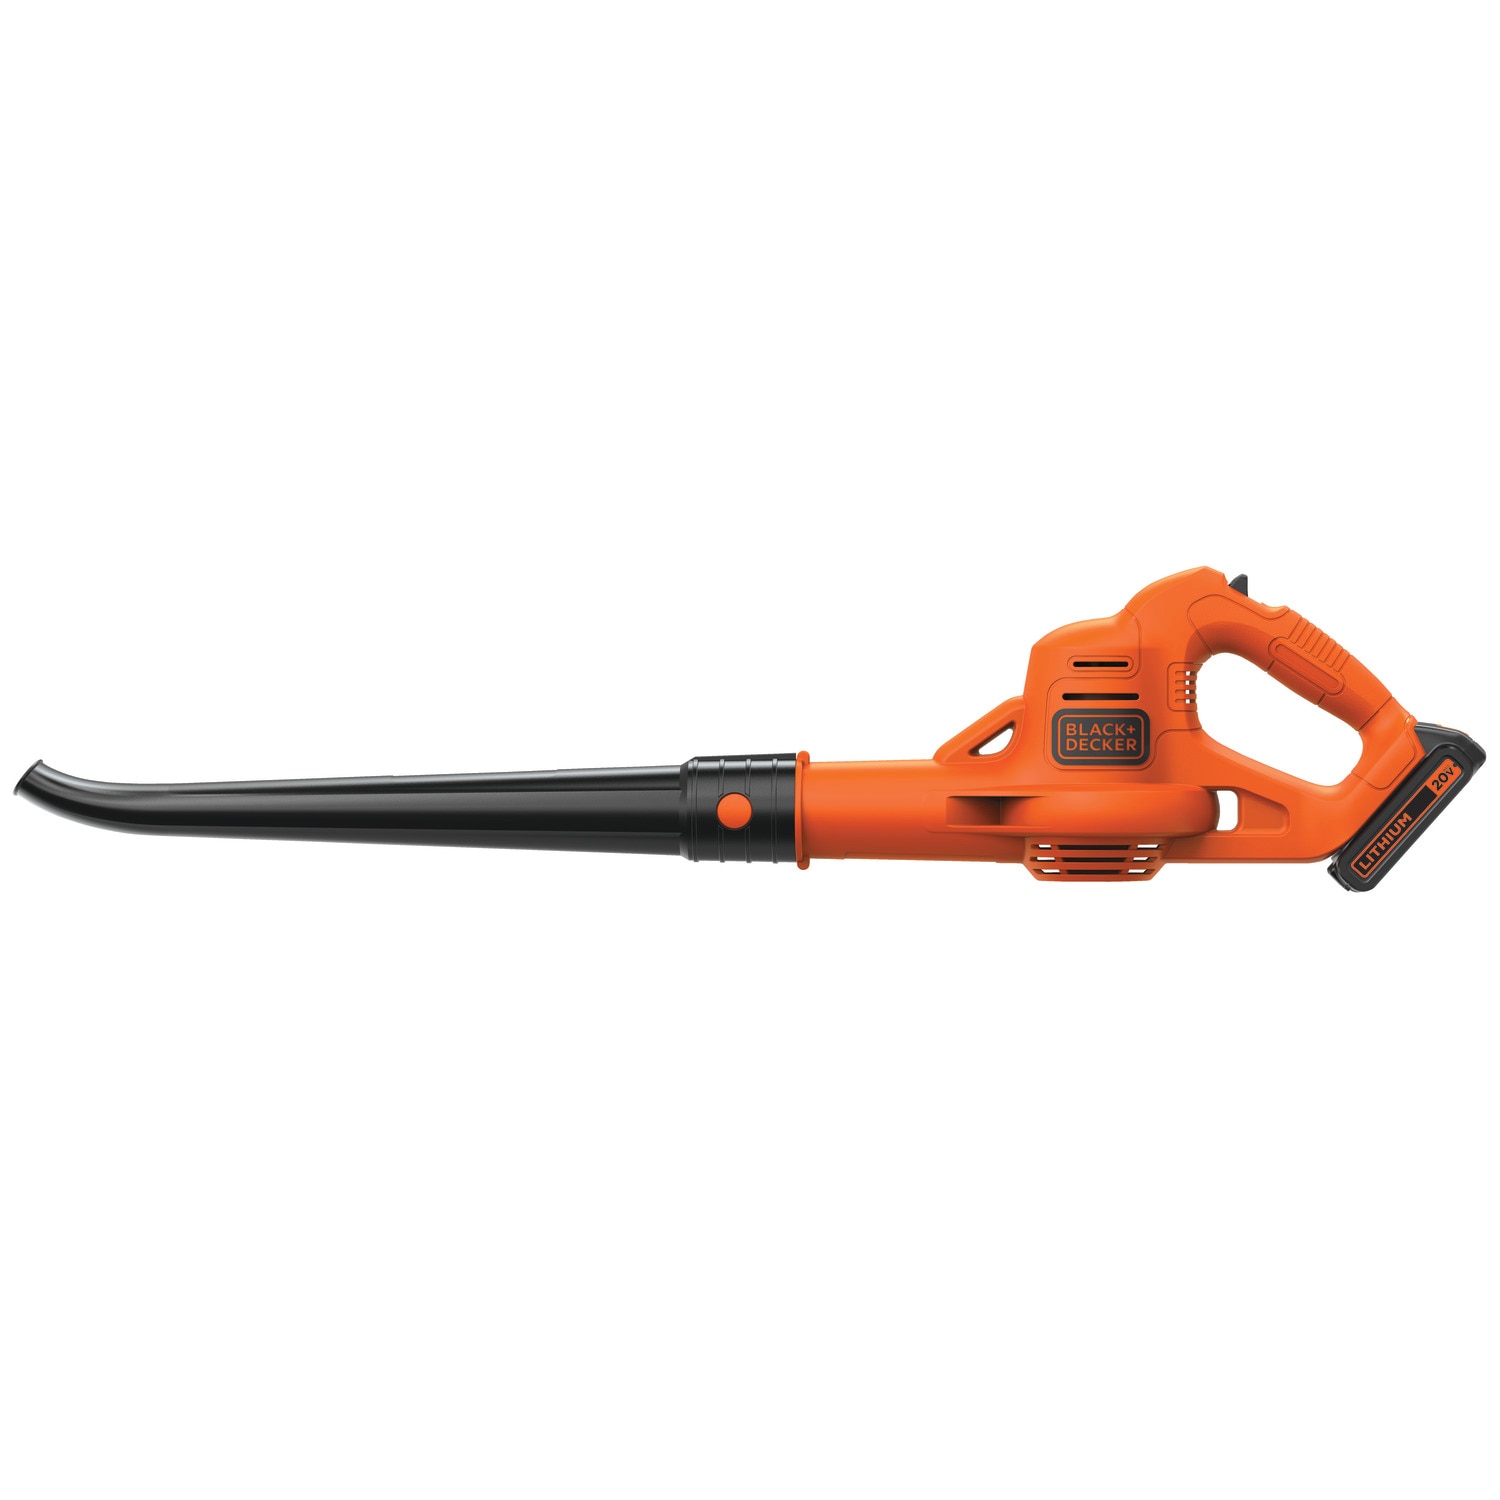 Has This Worx Nitro Leaf Blower for 44% Off for Fall